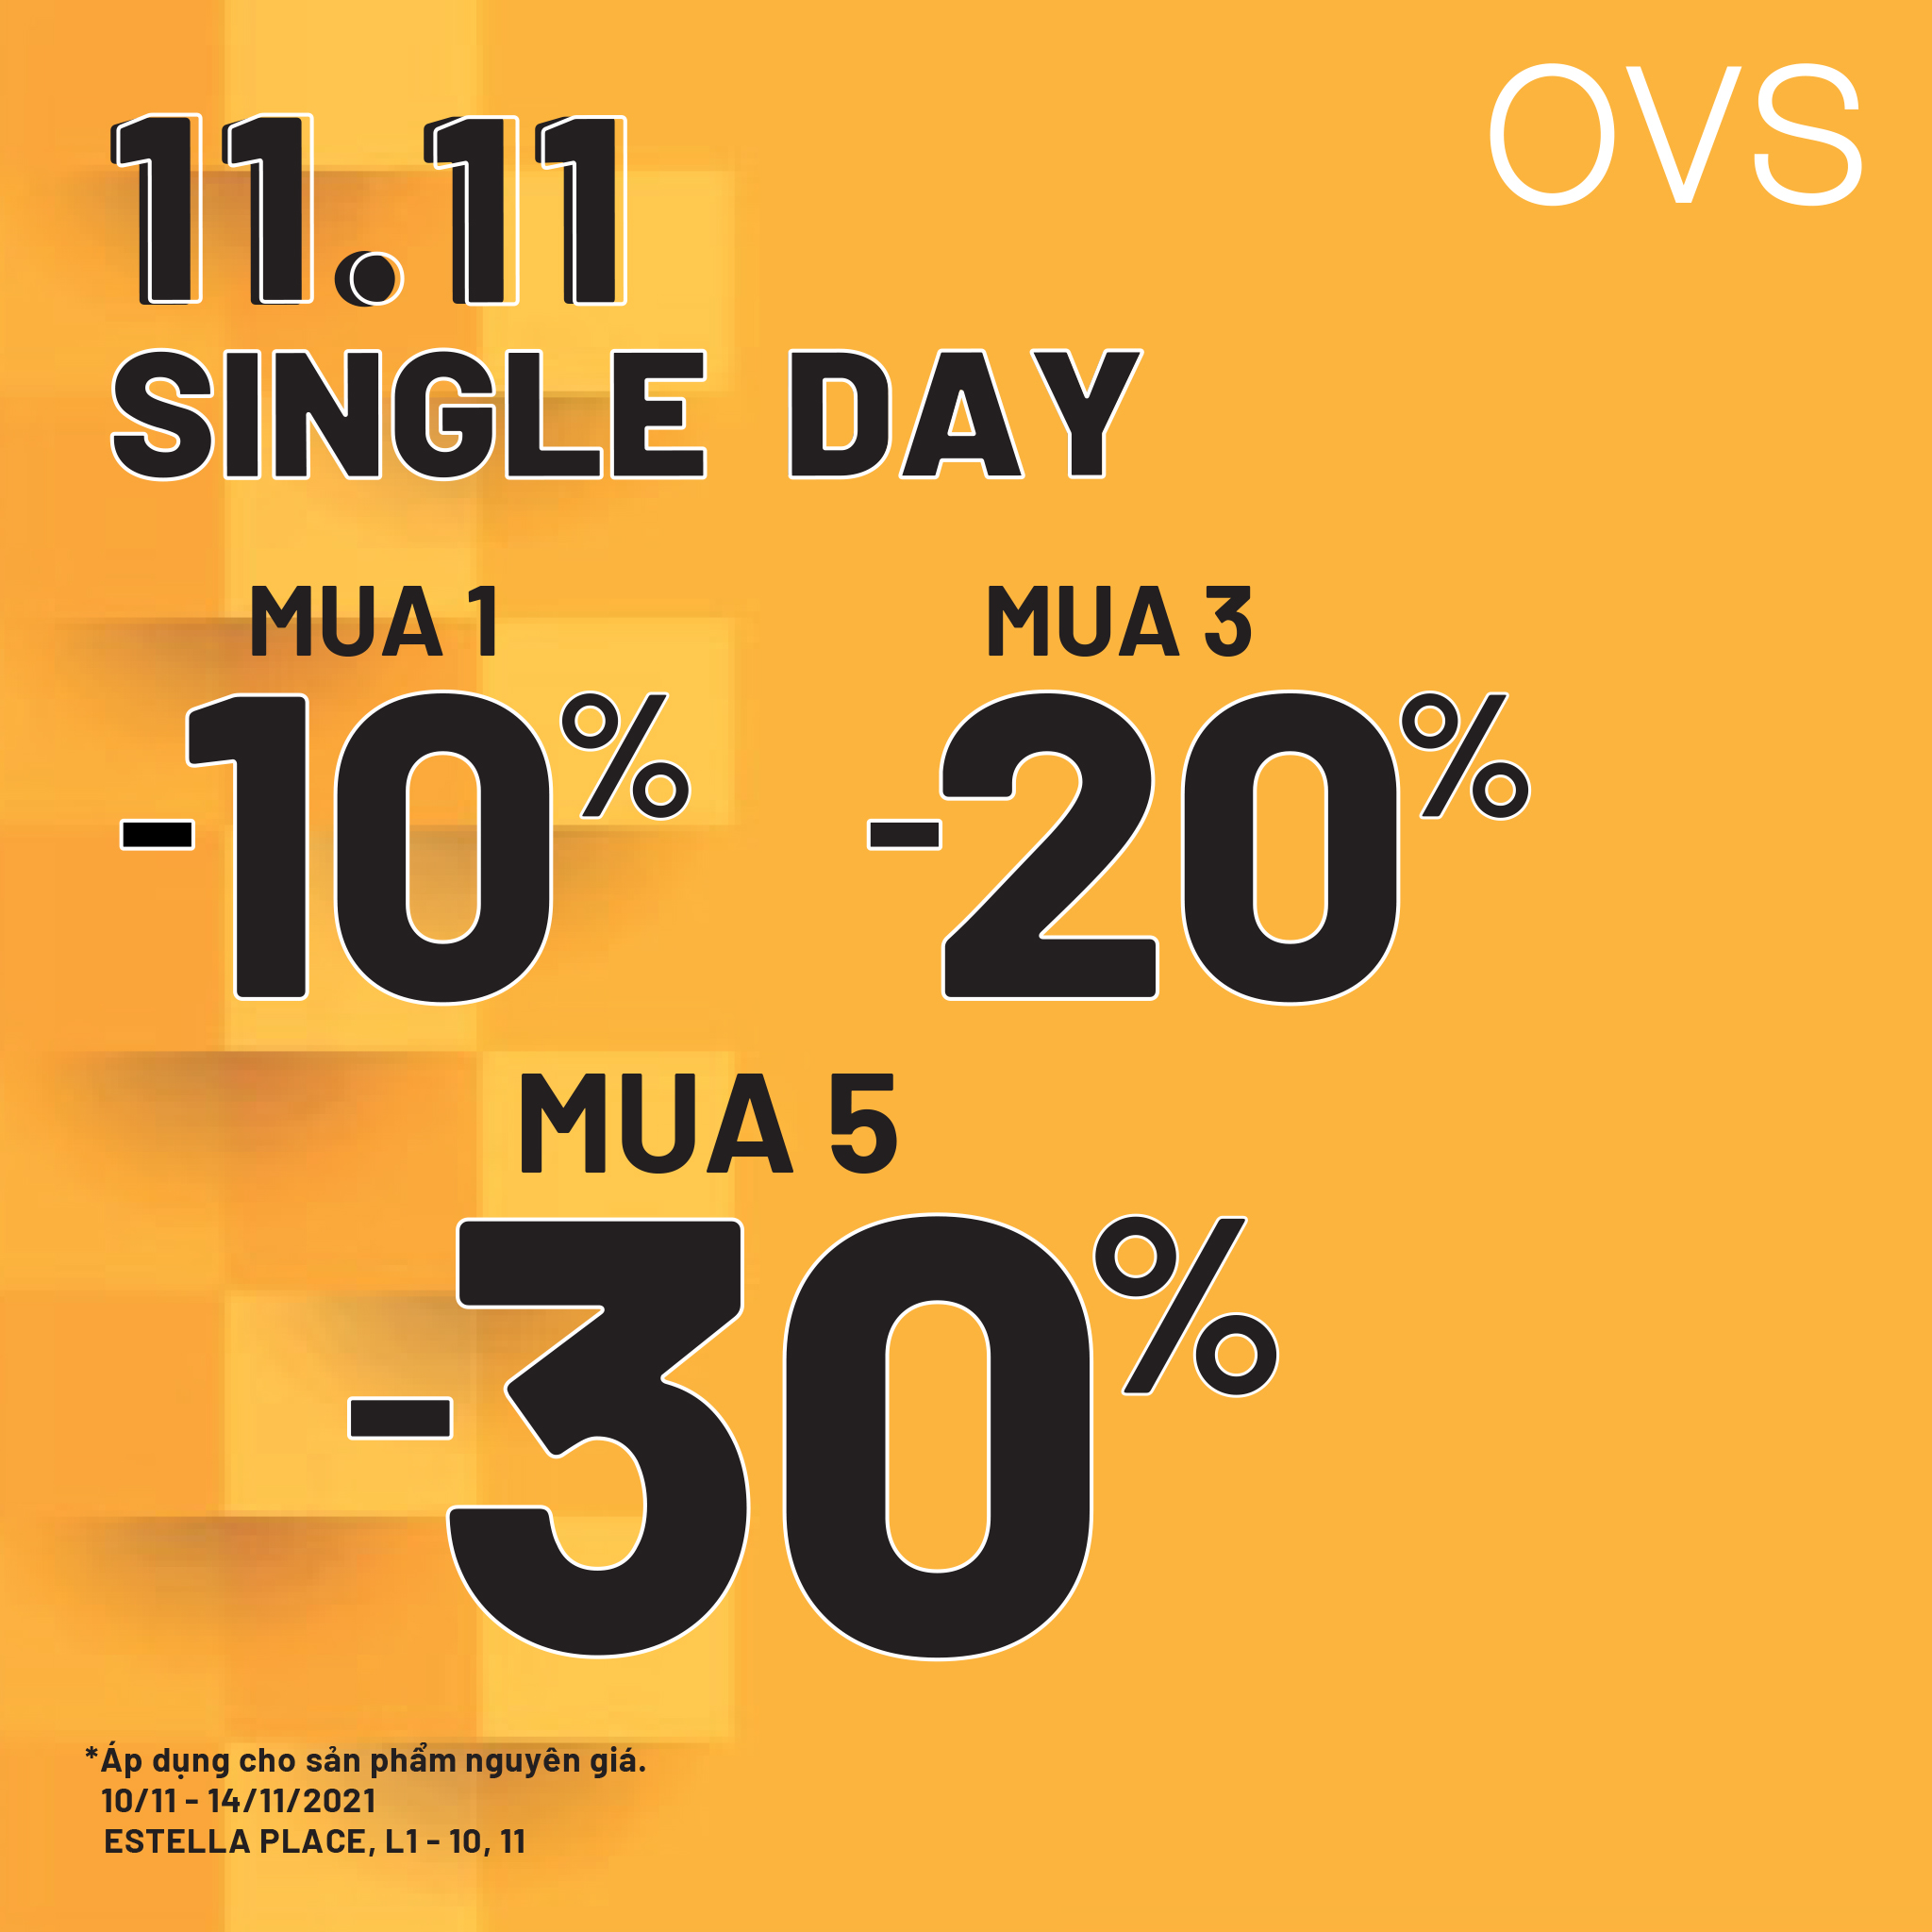 😎 HAPPY SINGLE DAY - BUY MORE SAVE MORE WITH OVS